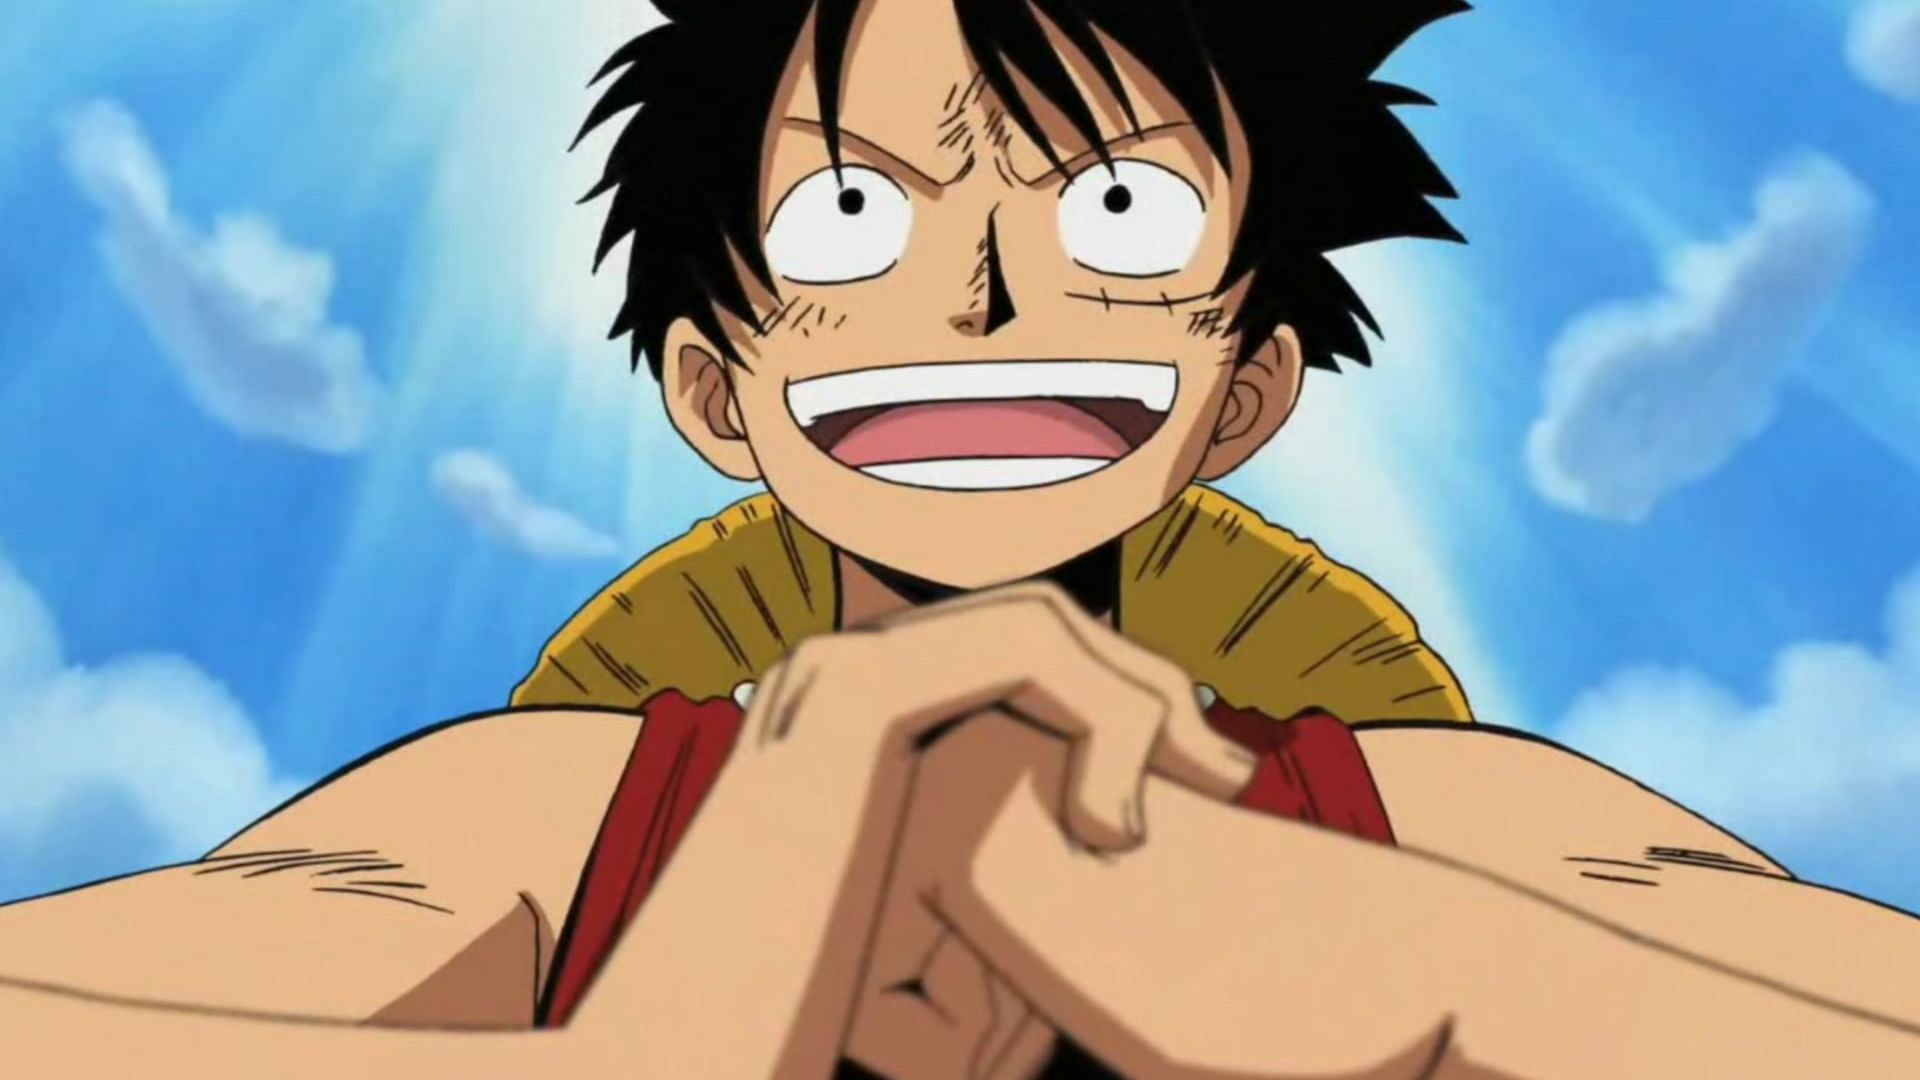 Monkey D. Luffy as shown in One Piece anime (Image via Toei Animation)